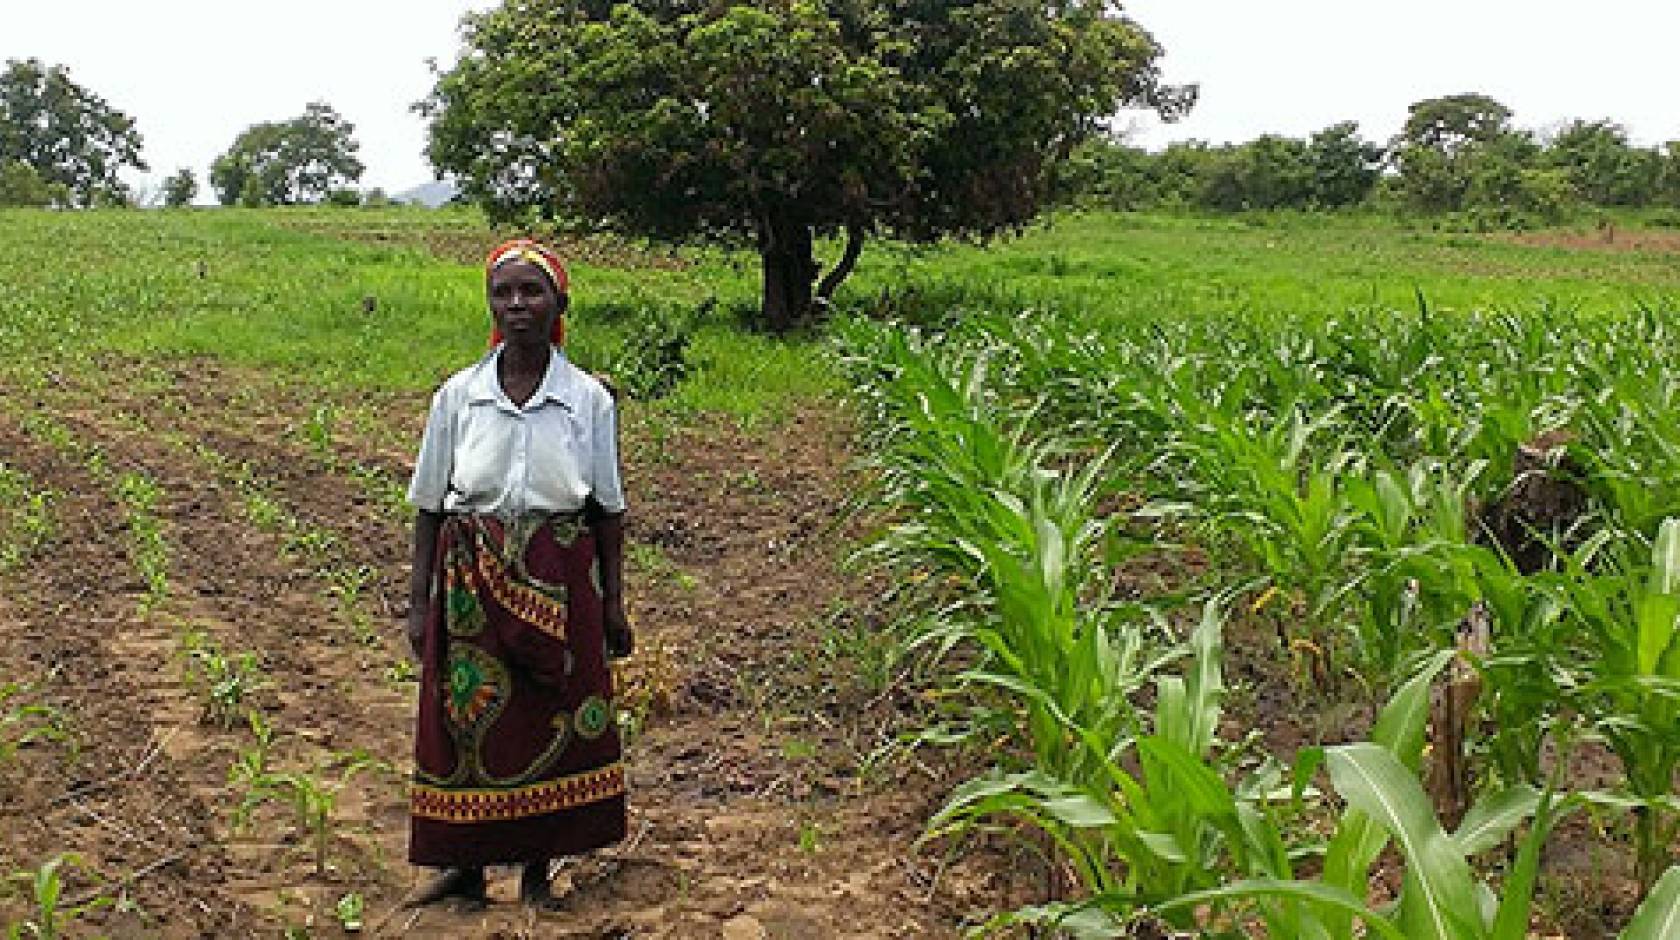 Monica Banda, a farmer in Zambia, stands in the middle of a field she planted. The field on the left is also hers but was planted using traditional techniques and seed. The fields on the right is a Zasaka field. Banda’s yield increased by two times after 